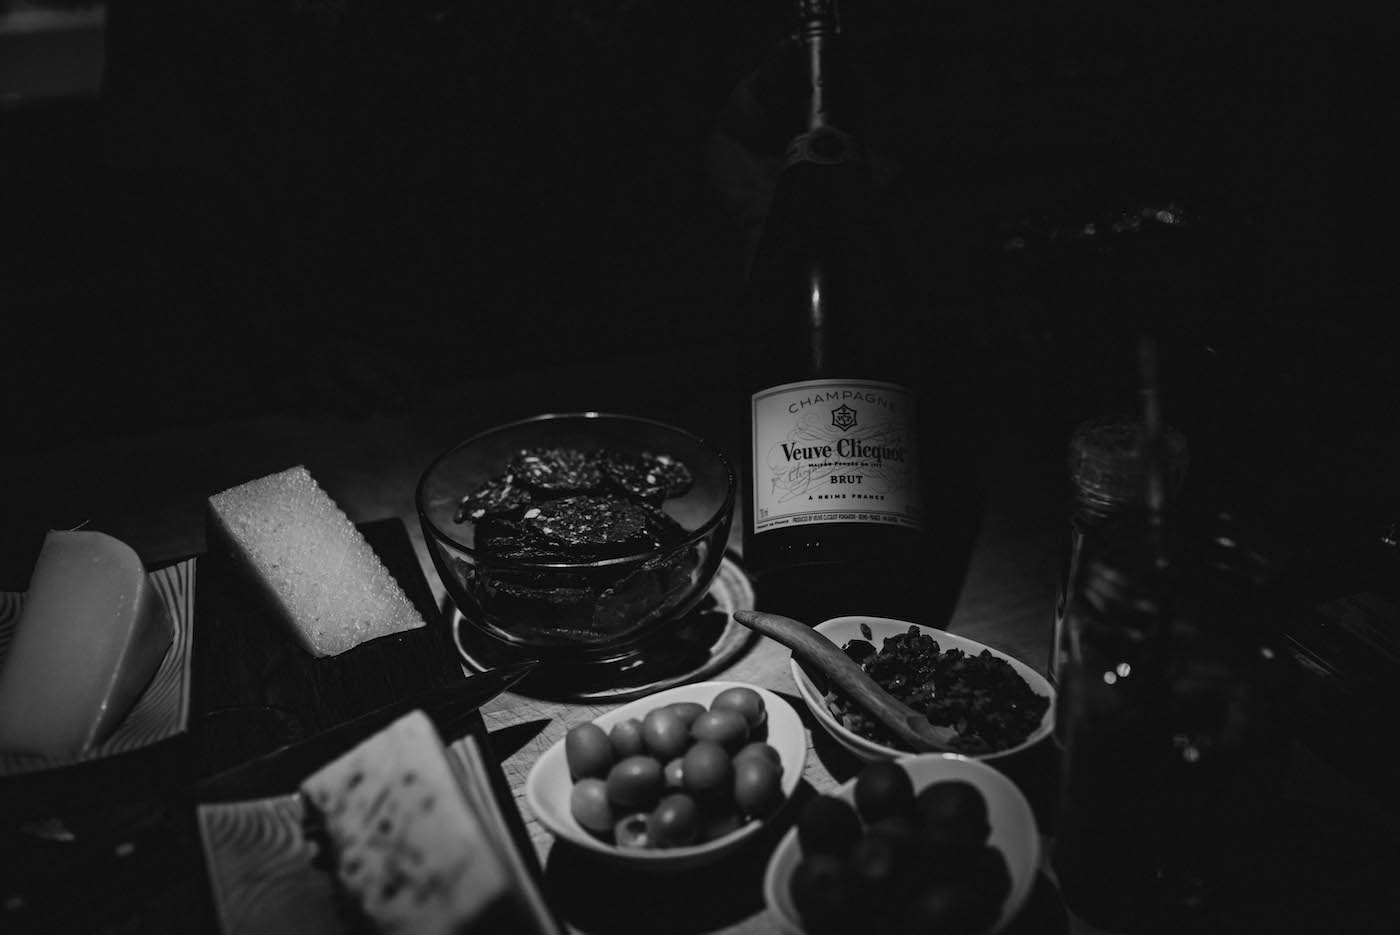 Black and White Wedding Photography | Intimate COVID Elopement Reception Dinner with Veuve Clicquot French Champagne